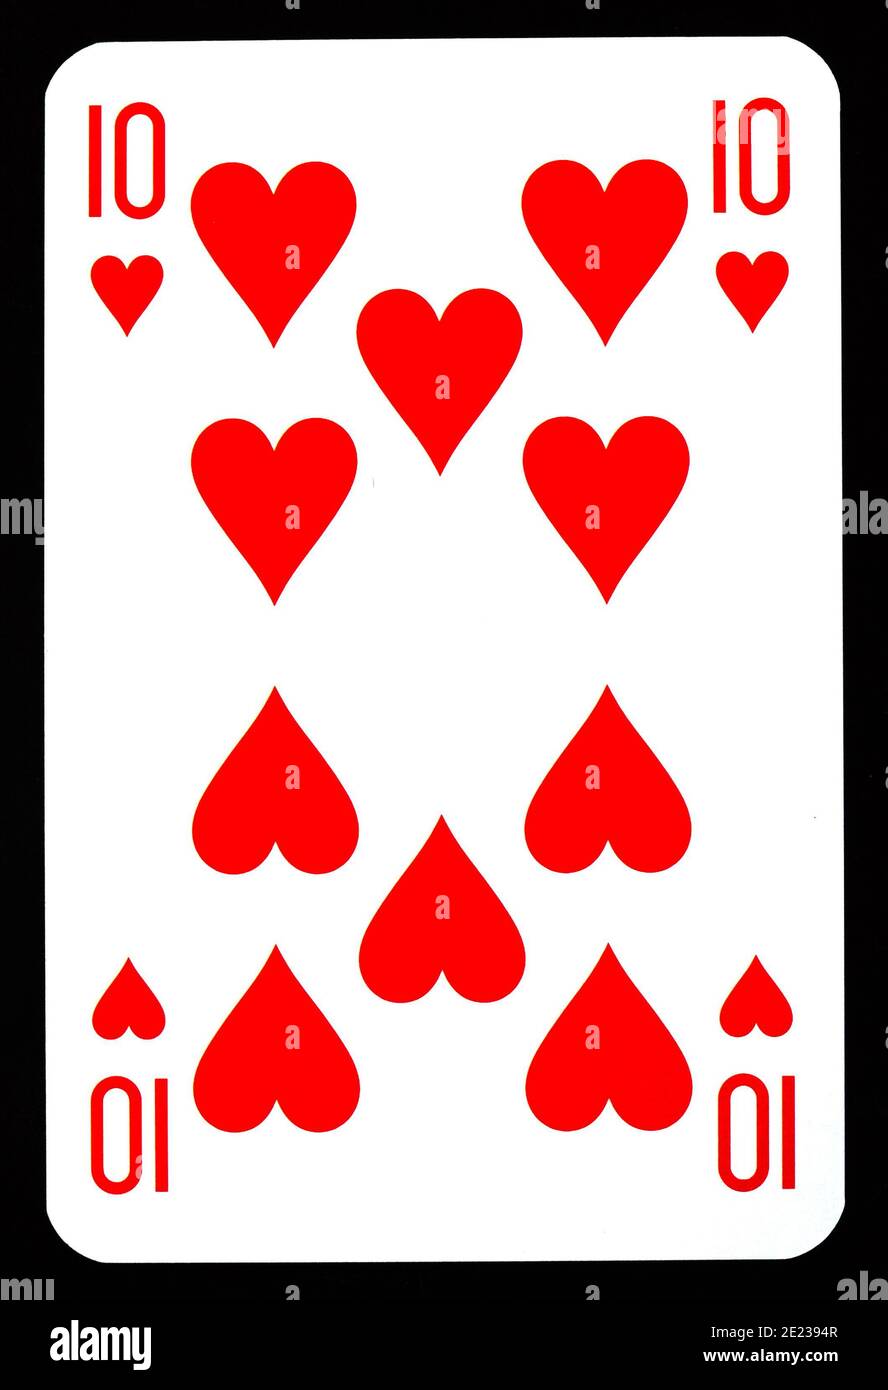 Ten of hearts playing card isolated on black Stock Photo - Alamy